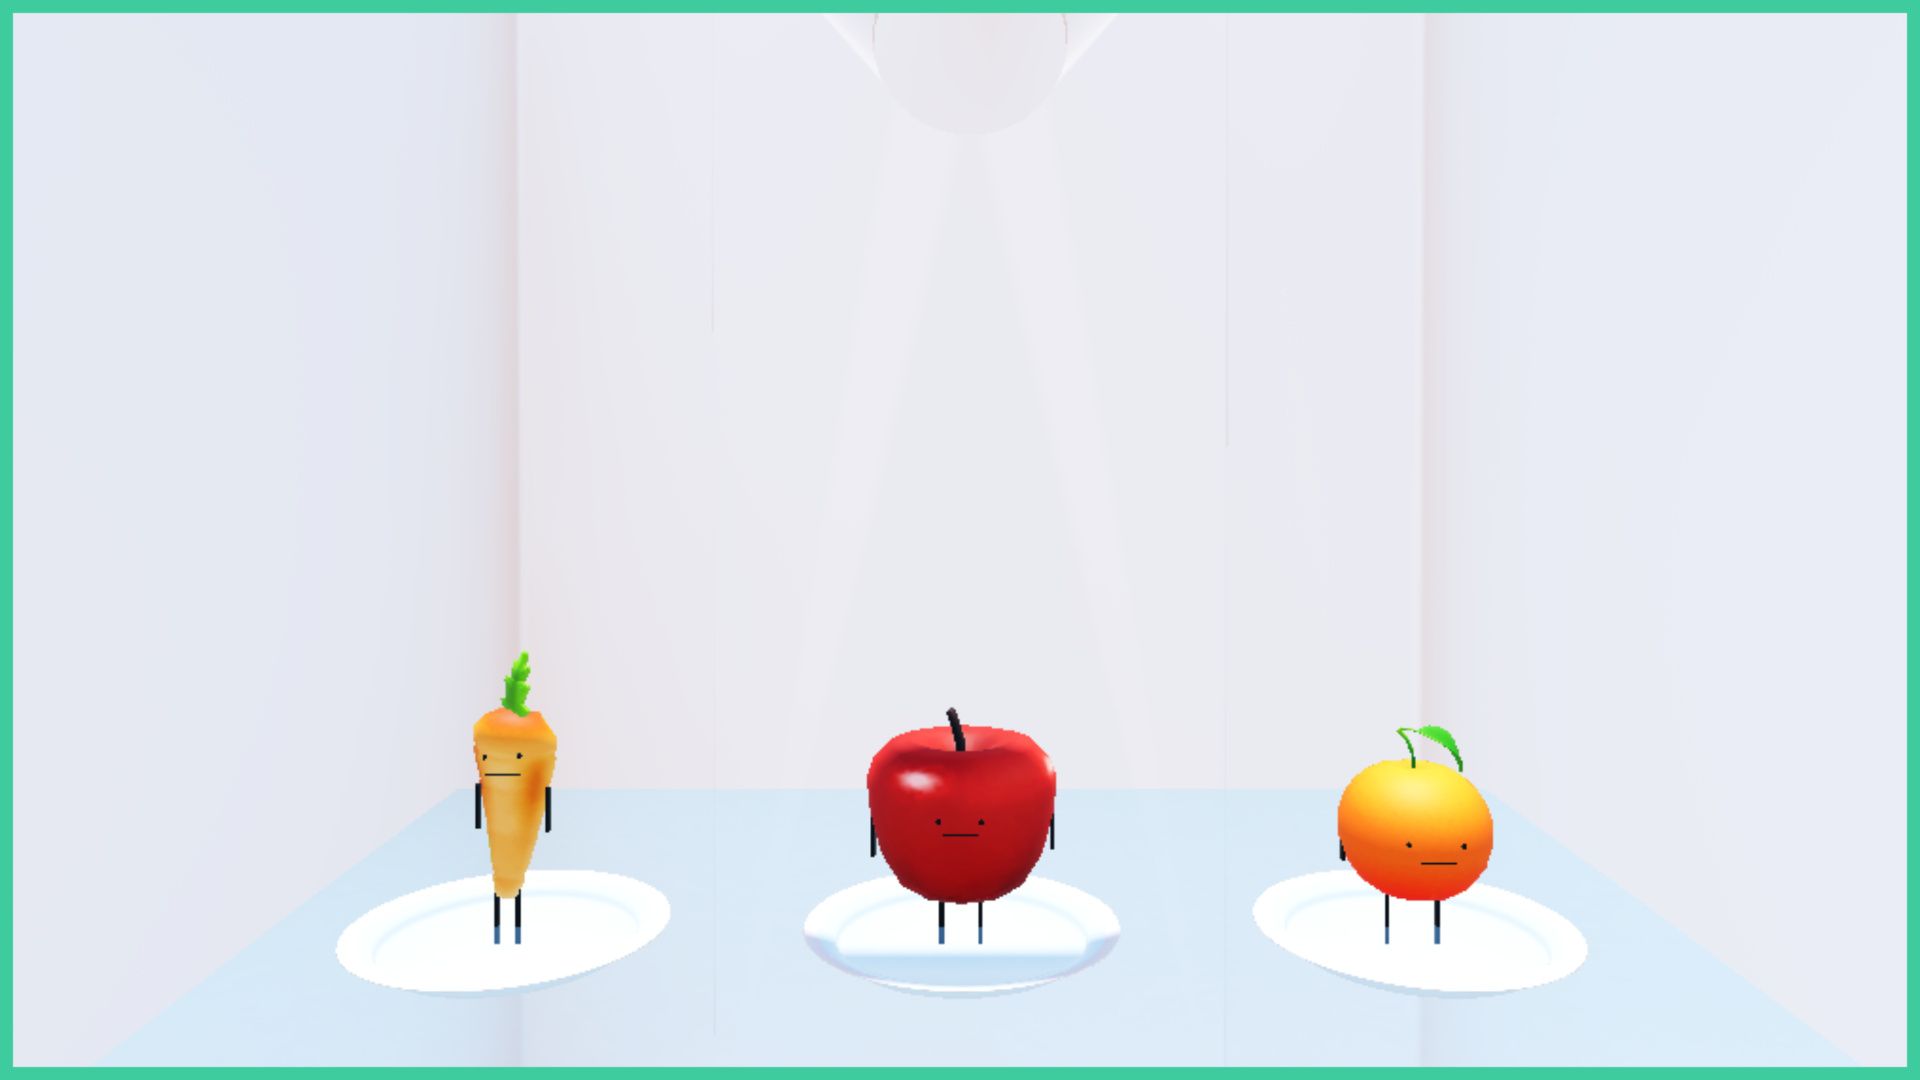 feature image for our secret staycation all foods, the image is a screenshot from the game with a screenshot of the fridge with a carrot, apple, and orange standing on 3 plates inside the fridge